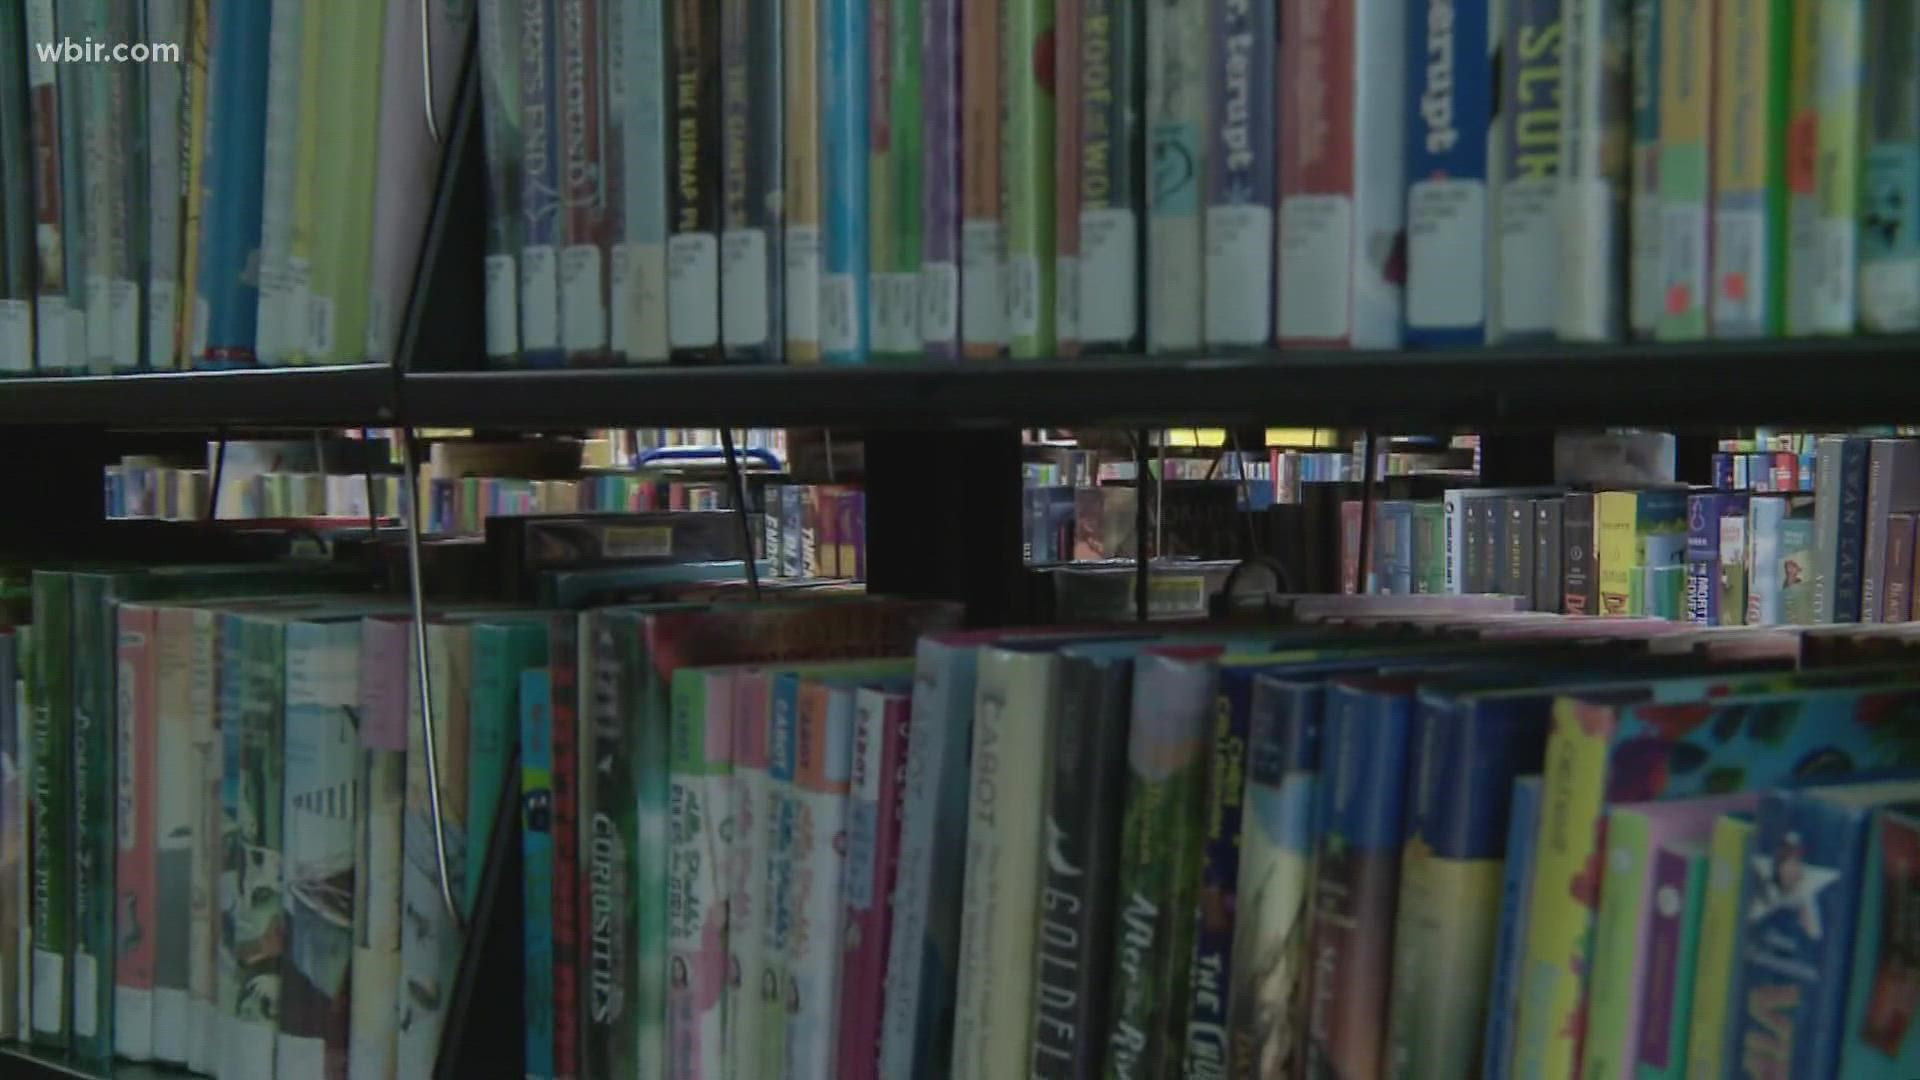 Rep. Jerry Sexton (R - Bean Station) said that his bill would add more oversight to what books are available in school libraries across Tennessee.